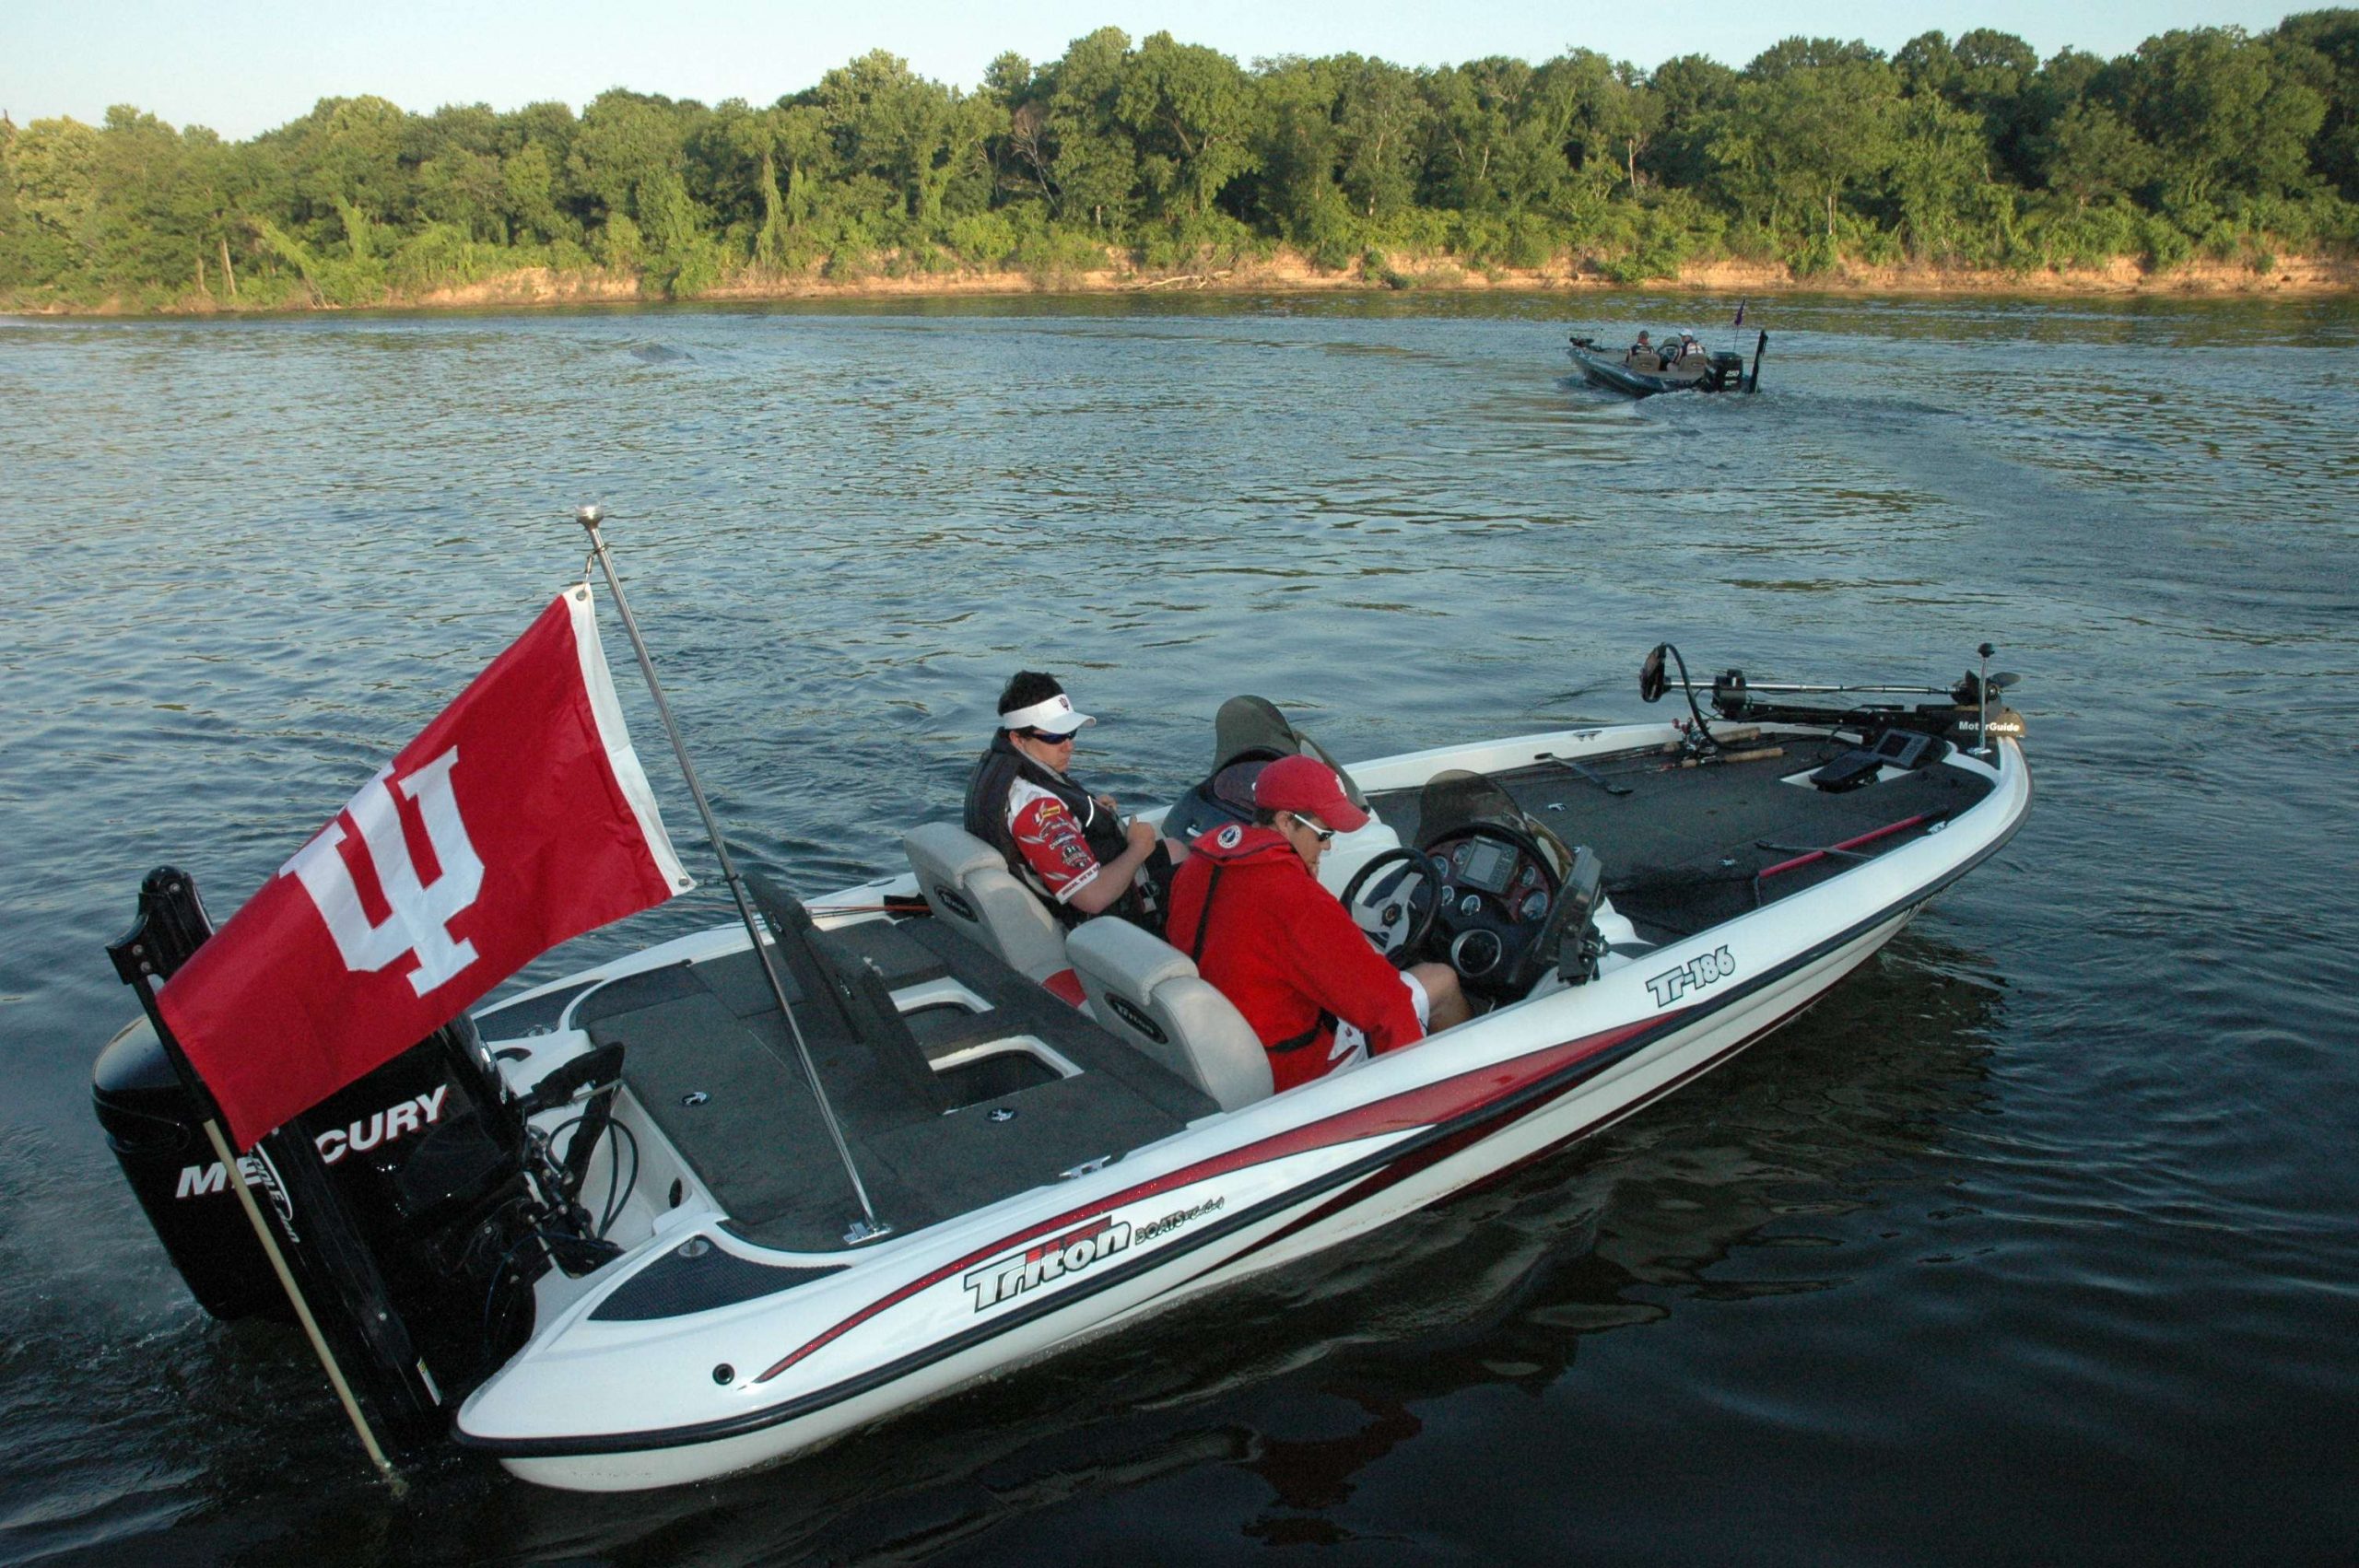 <p>
	The team from Indiana University flies their colors.</p>
